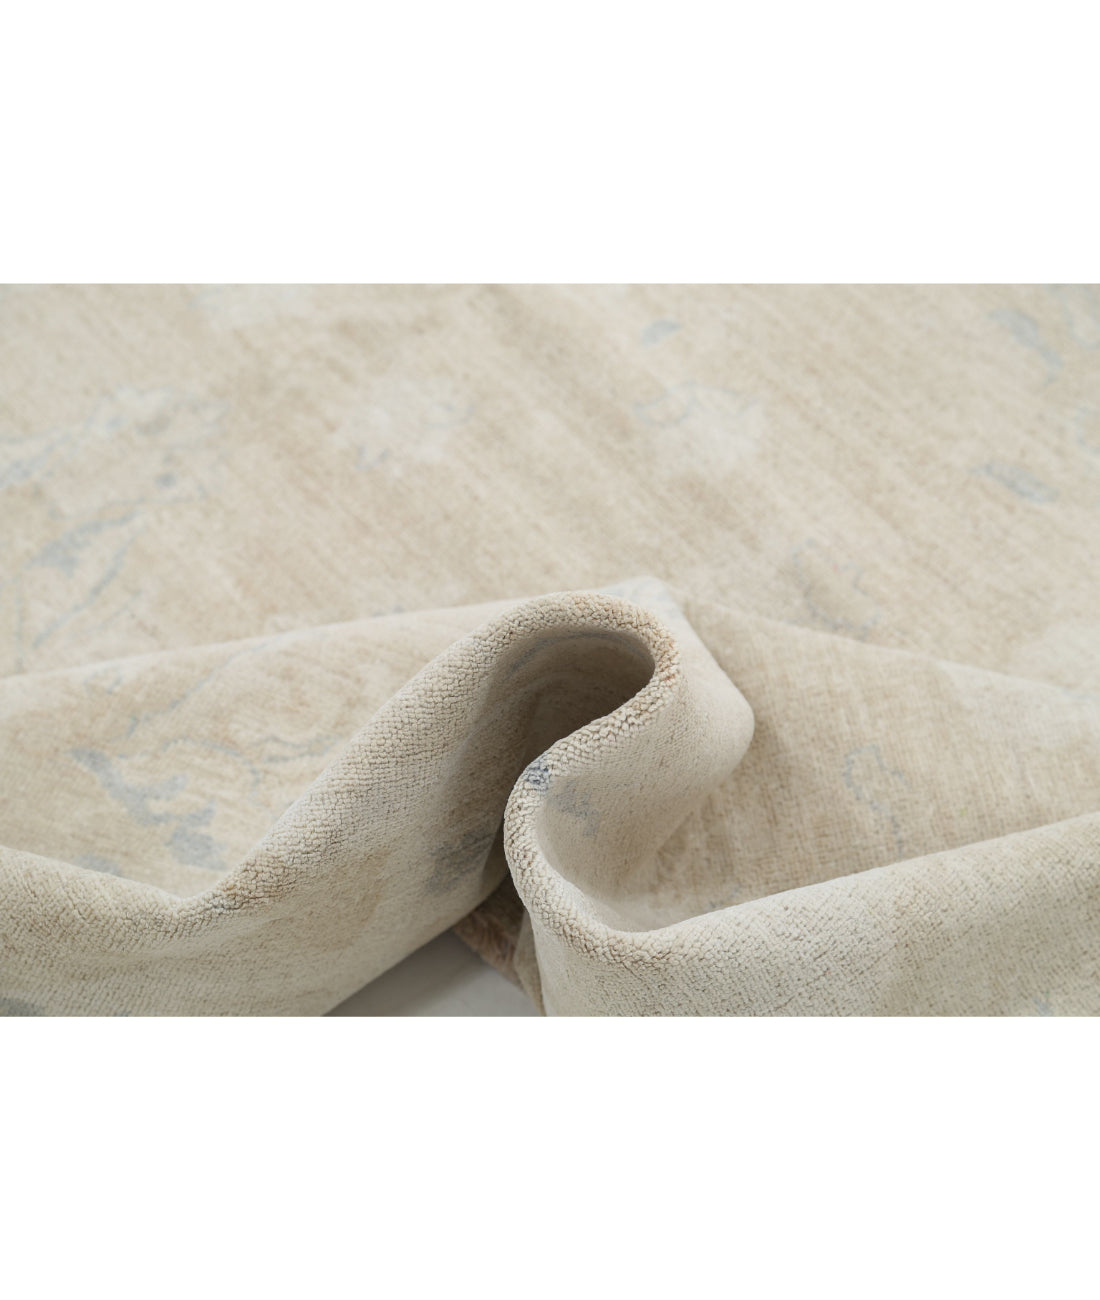 Hand Knotted Serenity Wool Rug - 9'3'' x 12'4'' 9'3'' x 12'4'' (278 X 370) / Taupe / Ivory